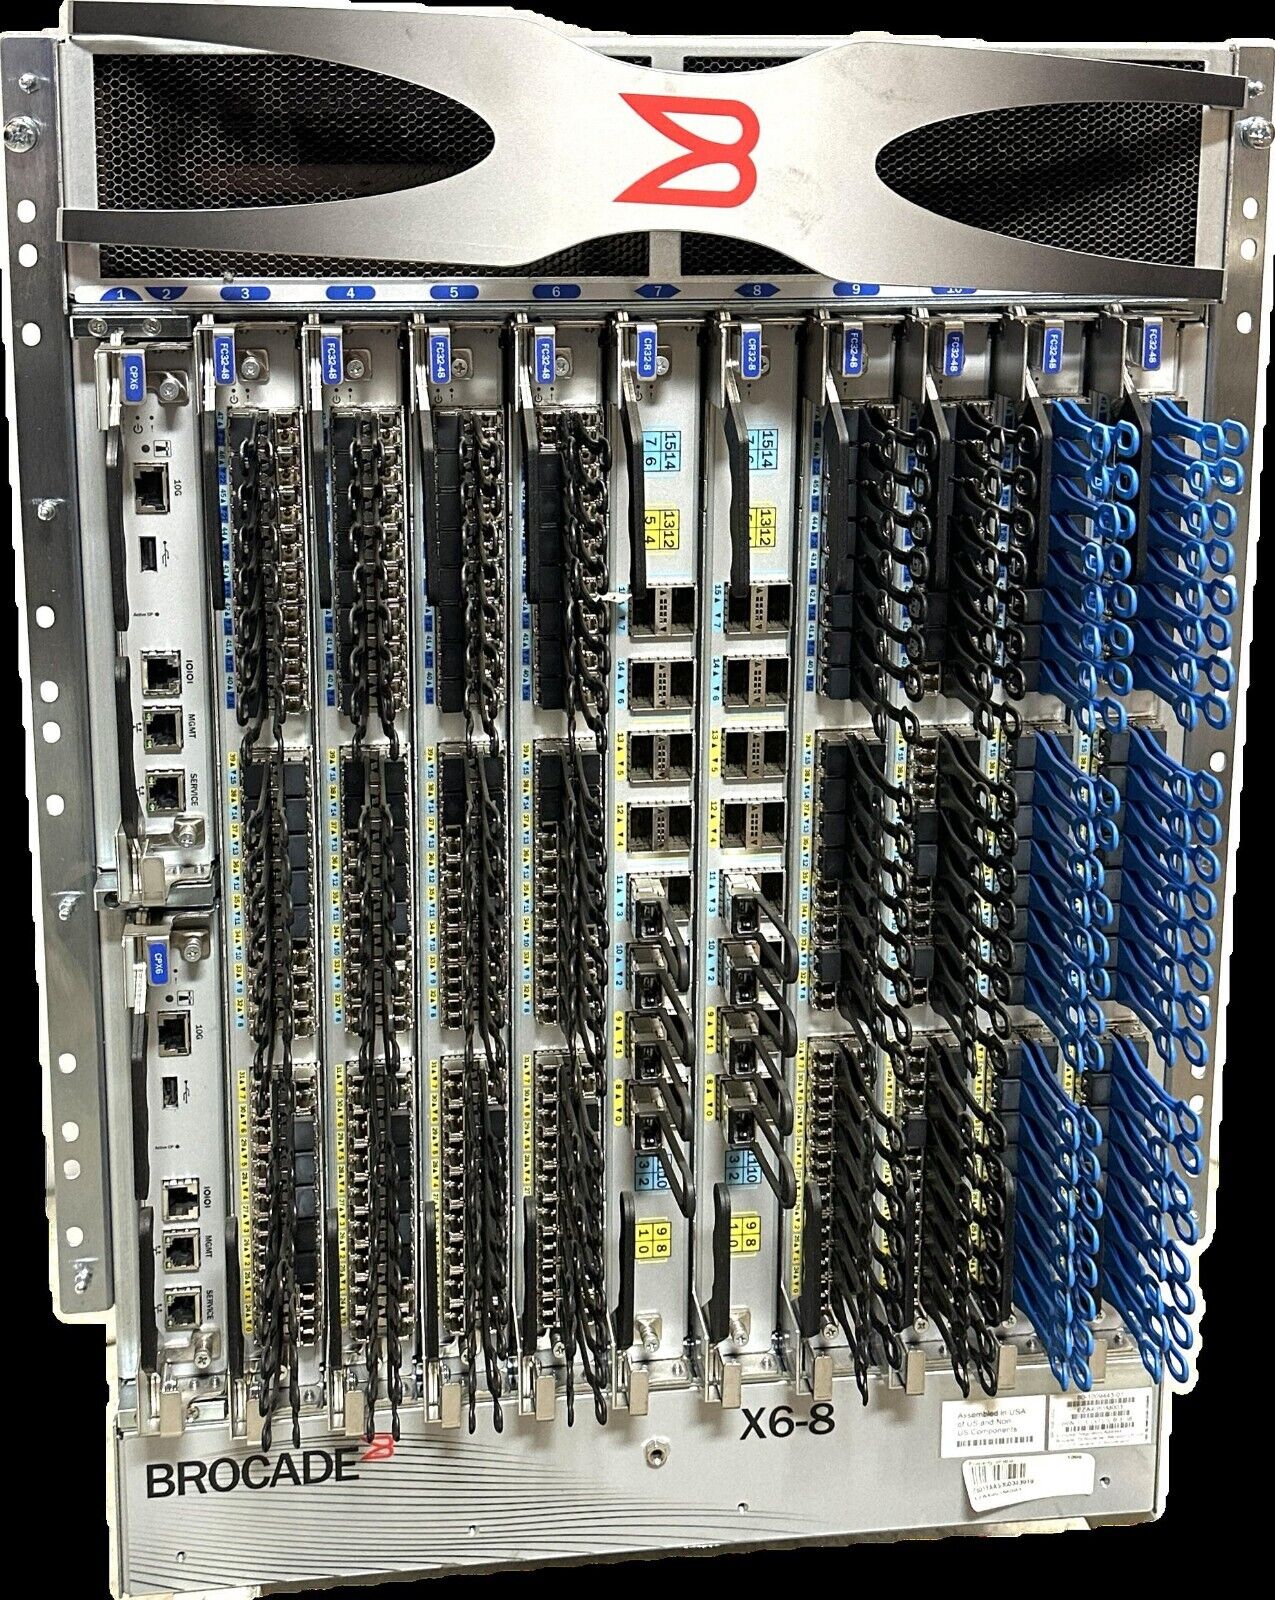 Brocade X6-8 8 Vertical Blade Slots Gen6 Fibre Channel with 384 Populated 16 Gbp